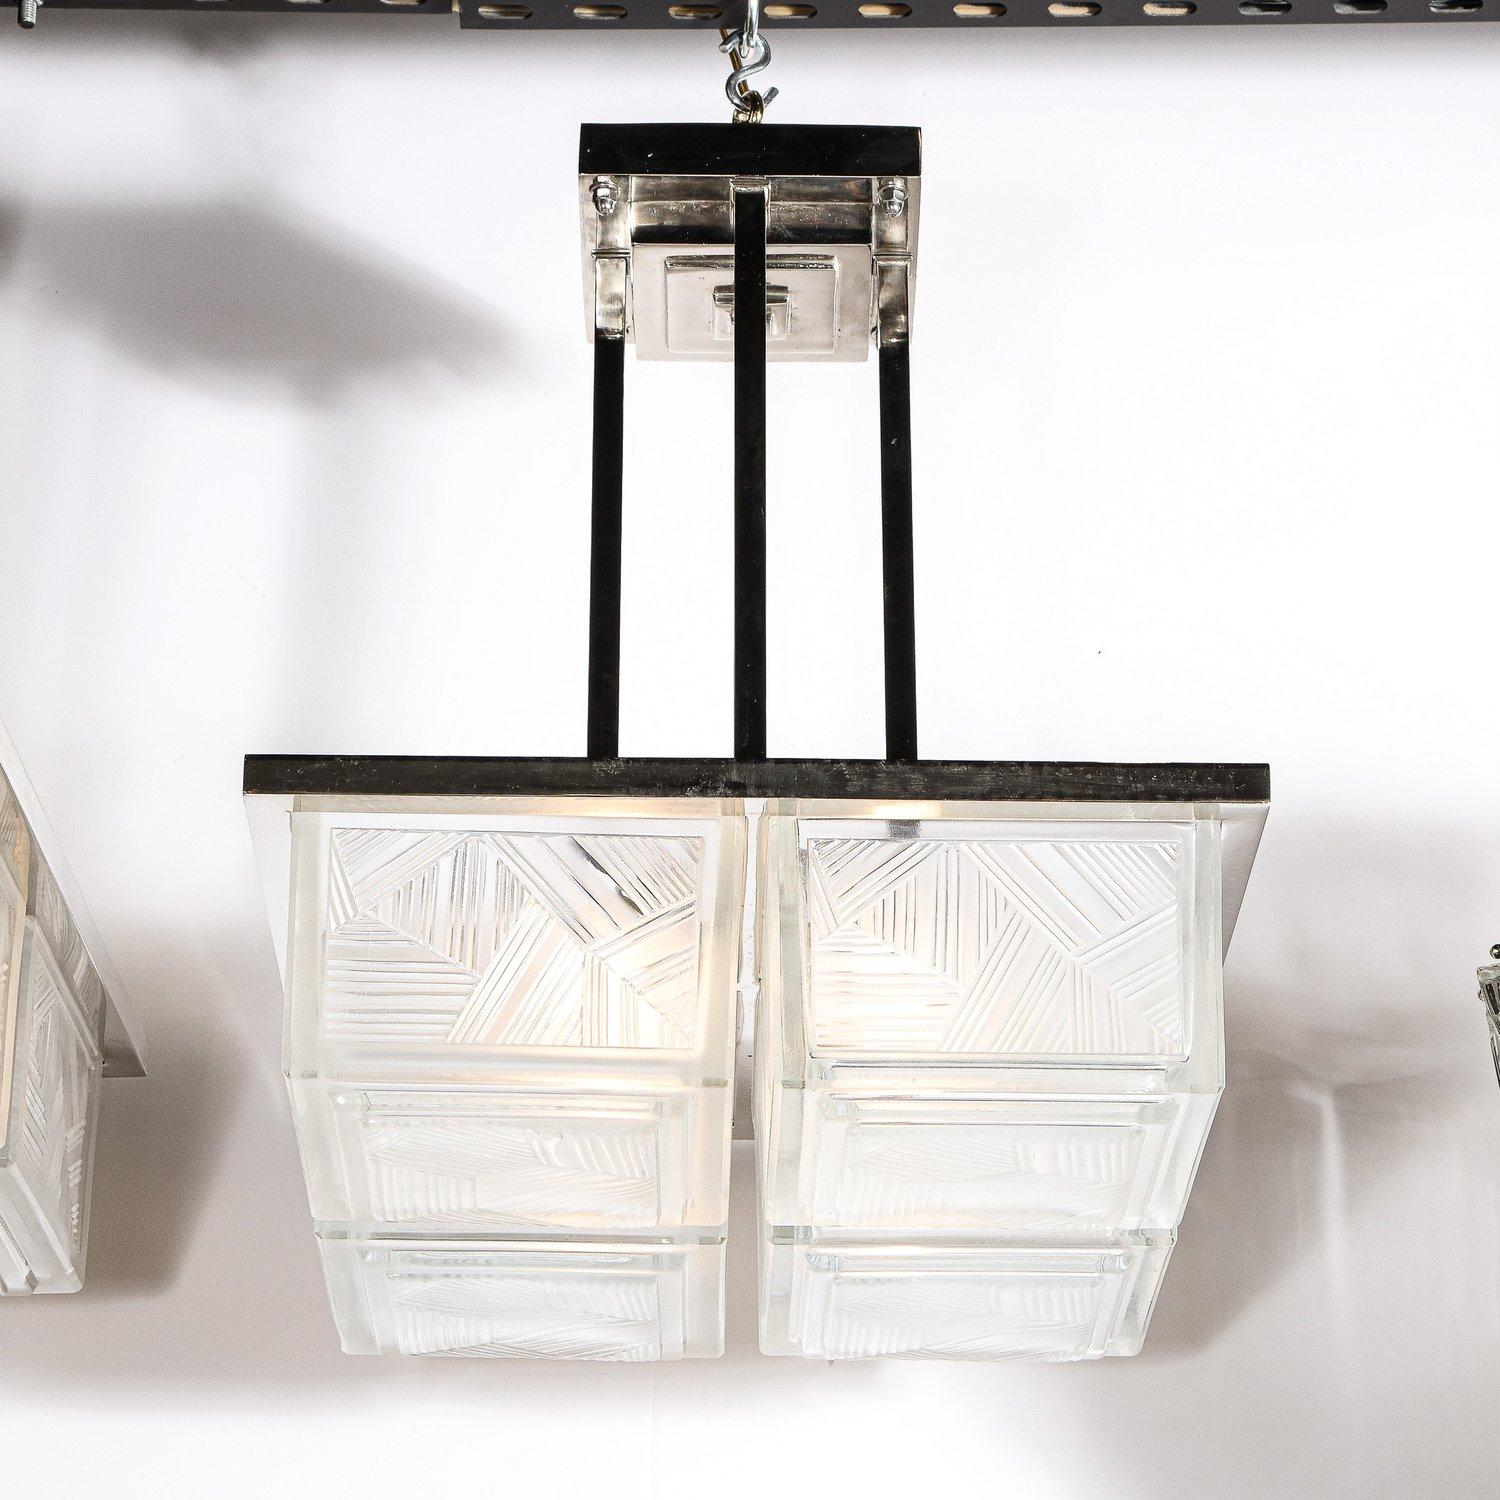 This rare and stunning Art Deco chandeliers were realized by the illustrious atelier of Sabino in France circa 1930. The chandelier features four separated volumetric cubic frosted glass forms with striated etched geometric detailing that attach to